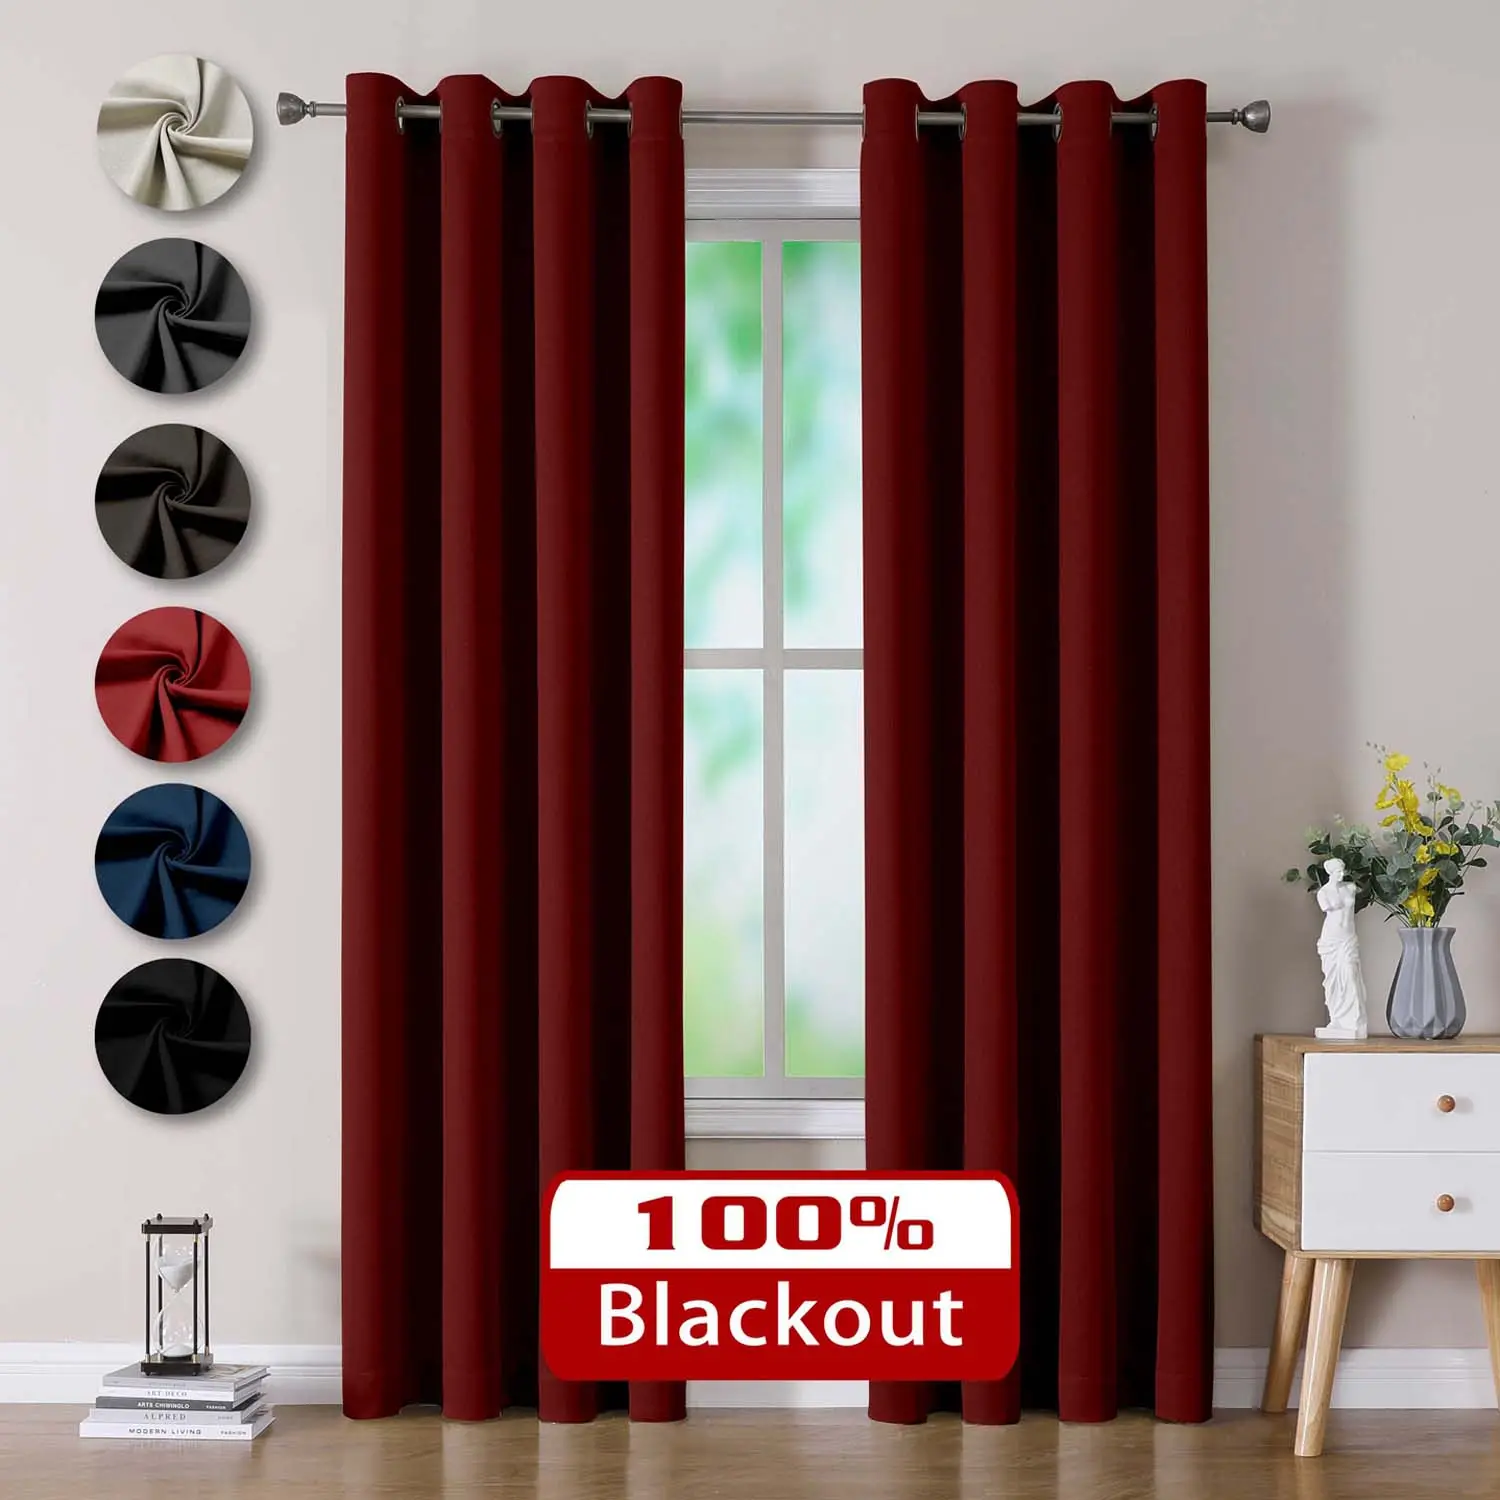 China Factory Good Quality Home Blackout Curtain Bedroom OWENIE Red Burlap Total Blackout Window Curtain for the Living Room